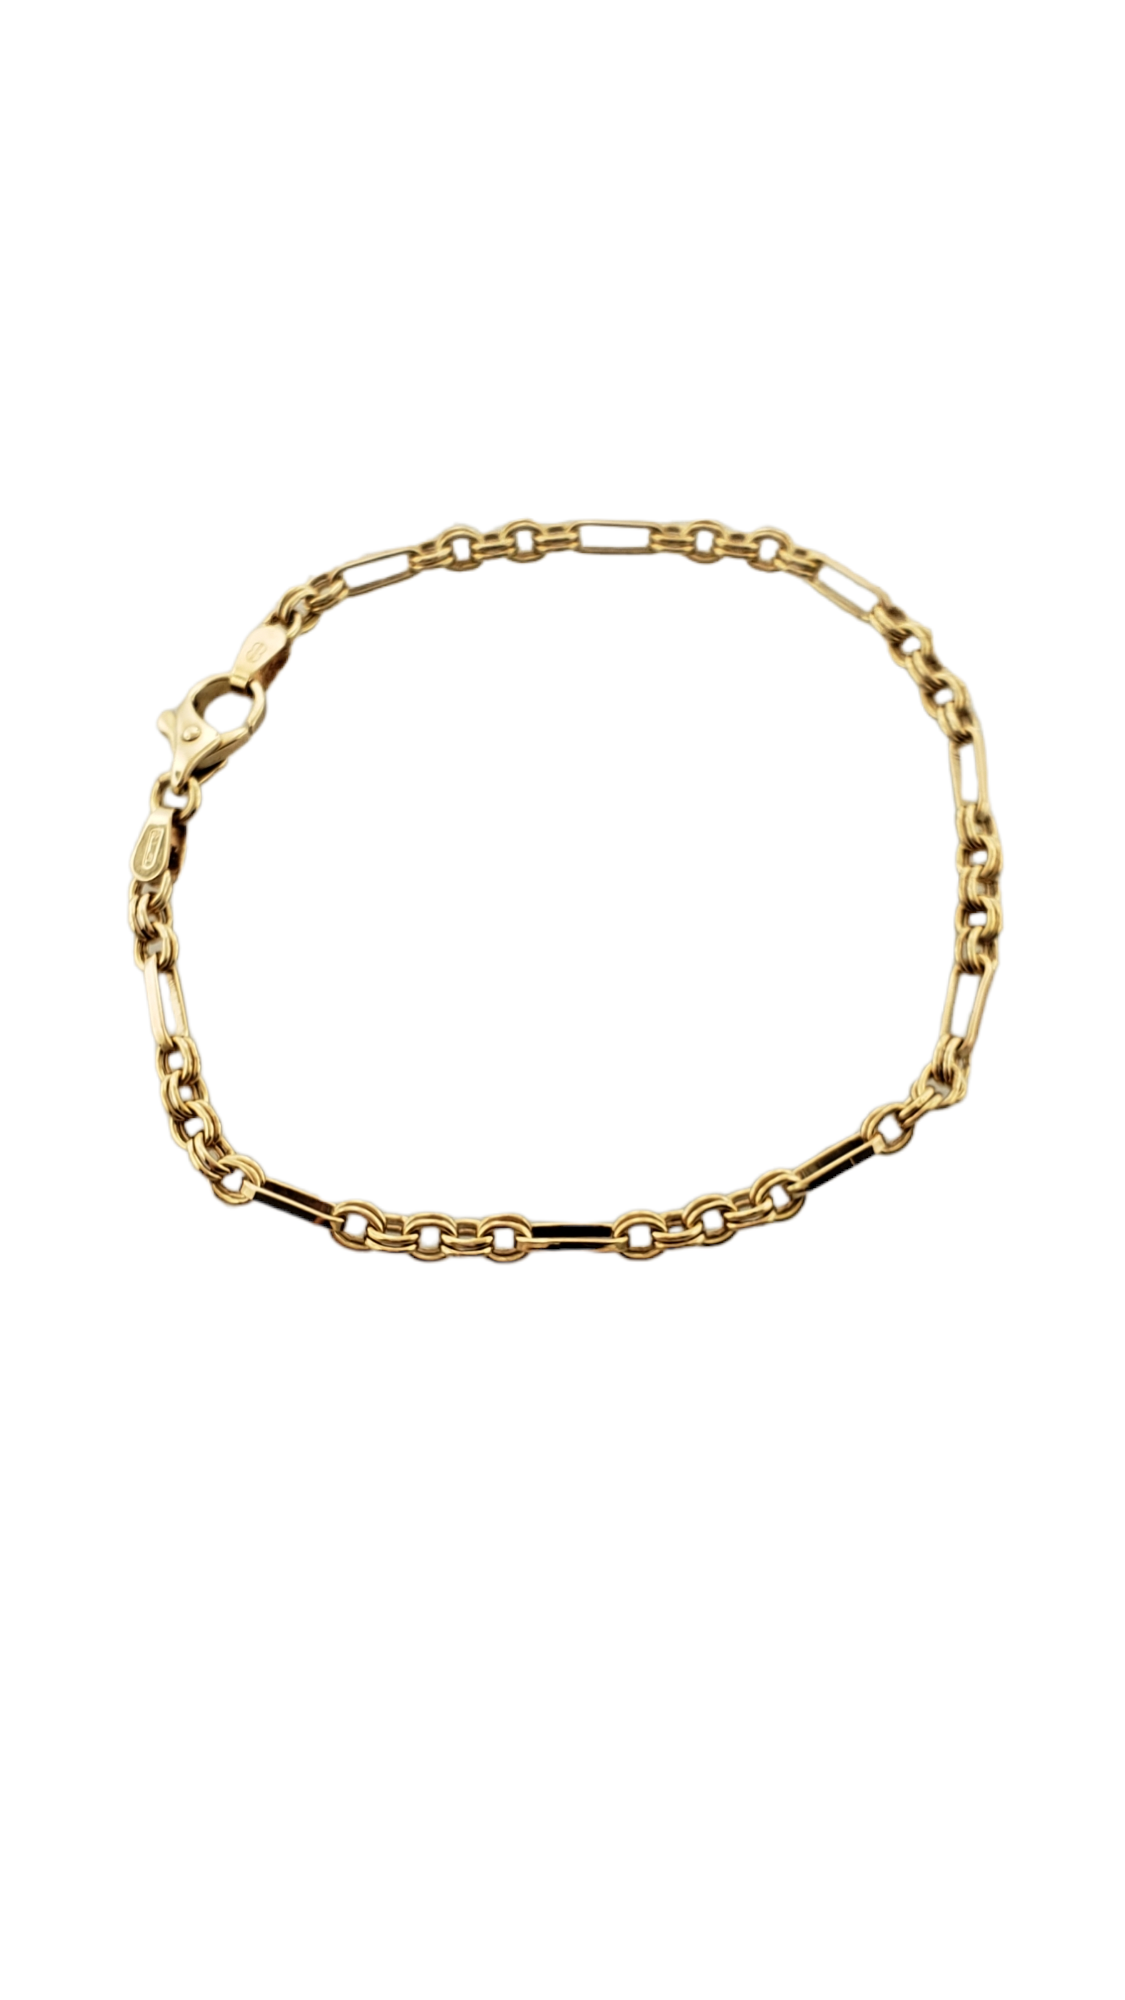 Figaro Style Bracelet 7 inches made in 14-Karat Yellow Gold